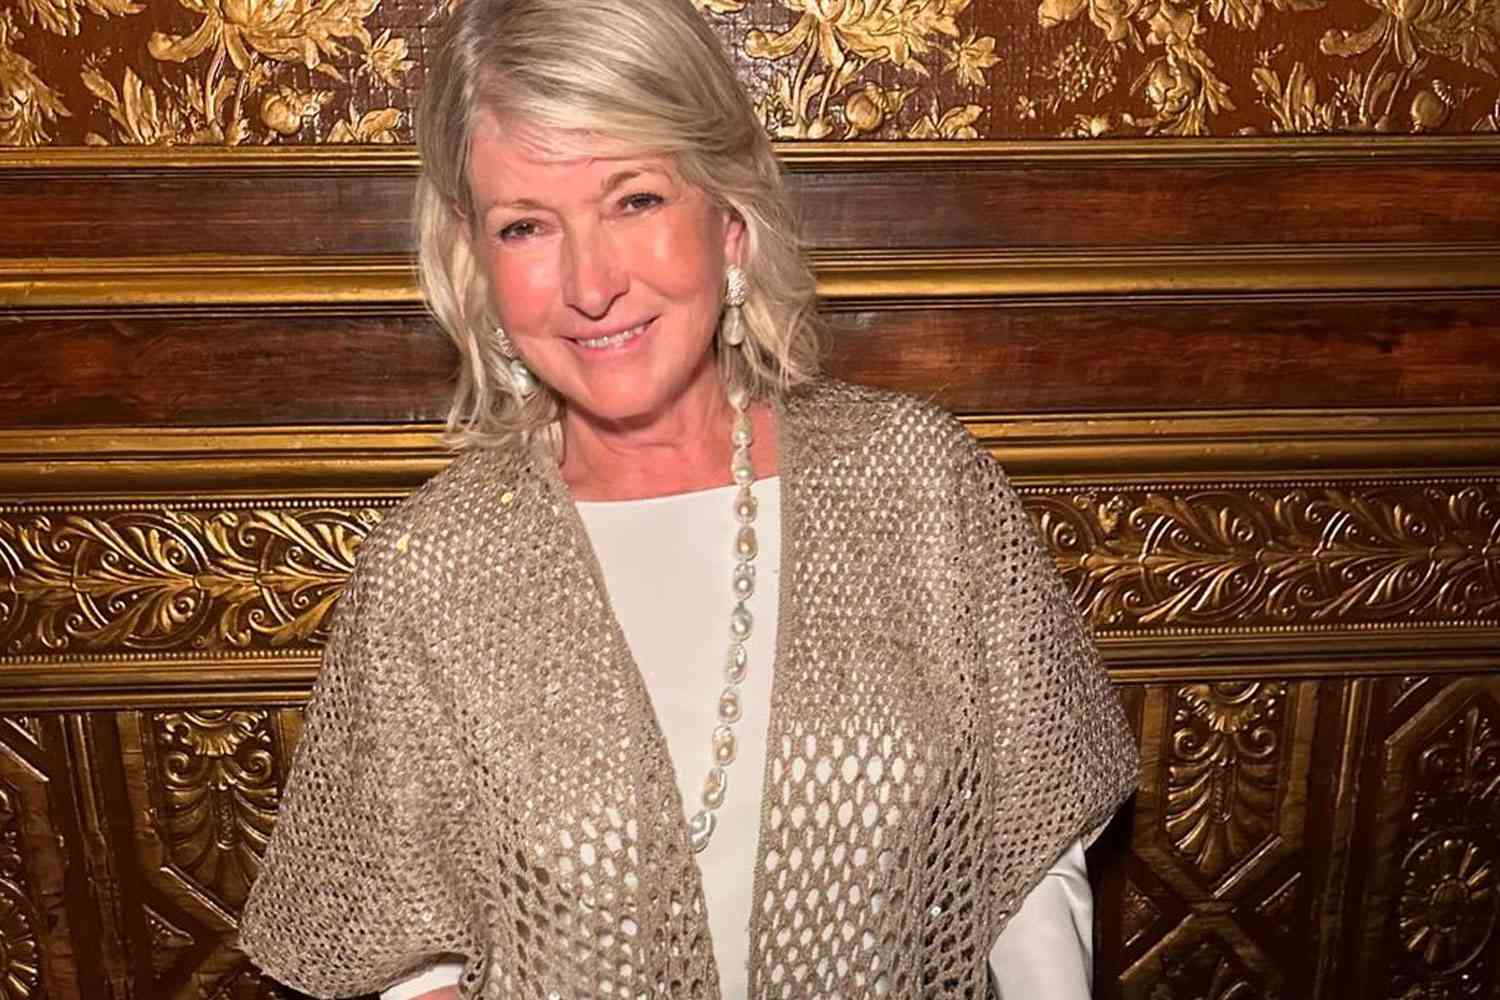 Martha Stewart Shows Off Cake Made by French Pastry Chef for Her 83rd Birthday Party in Paris: ‘Yummy’